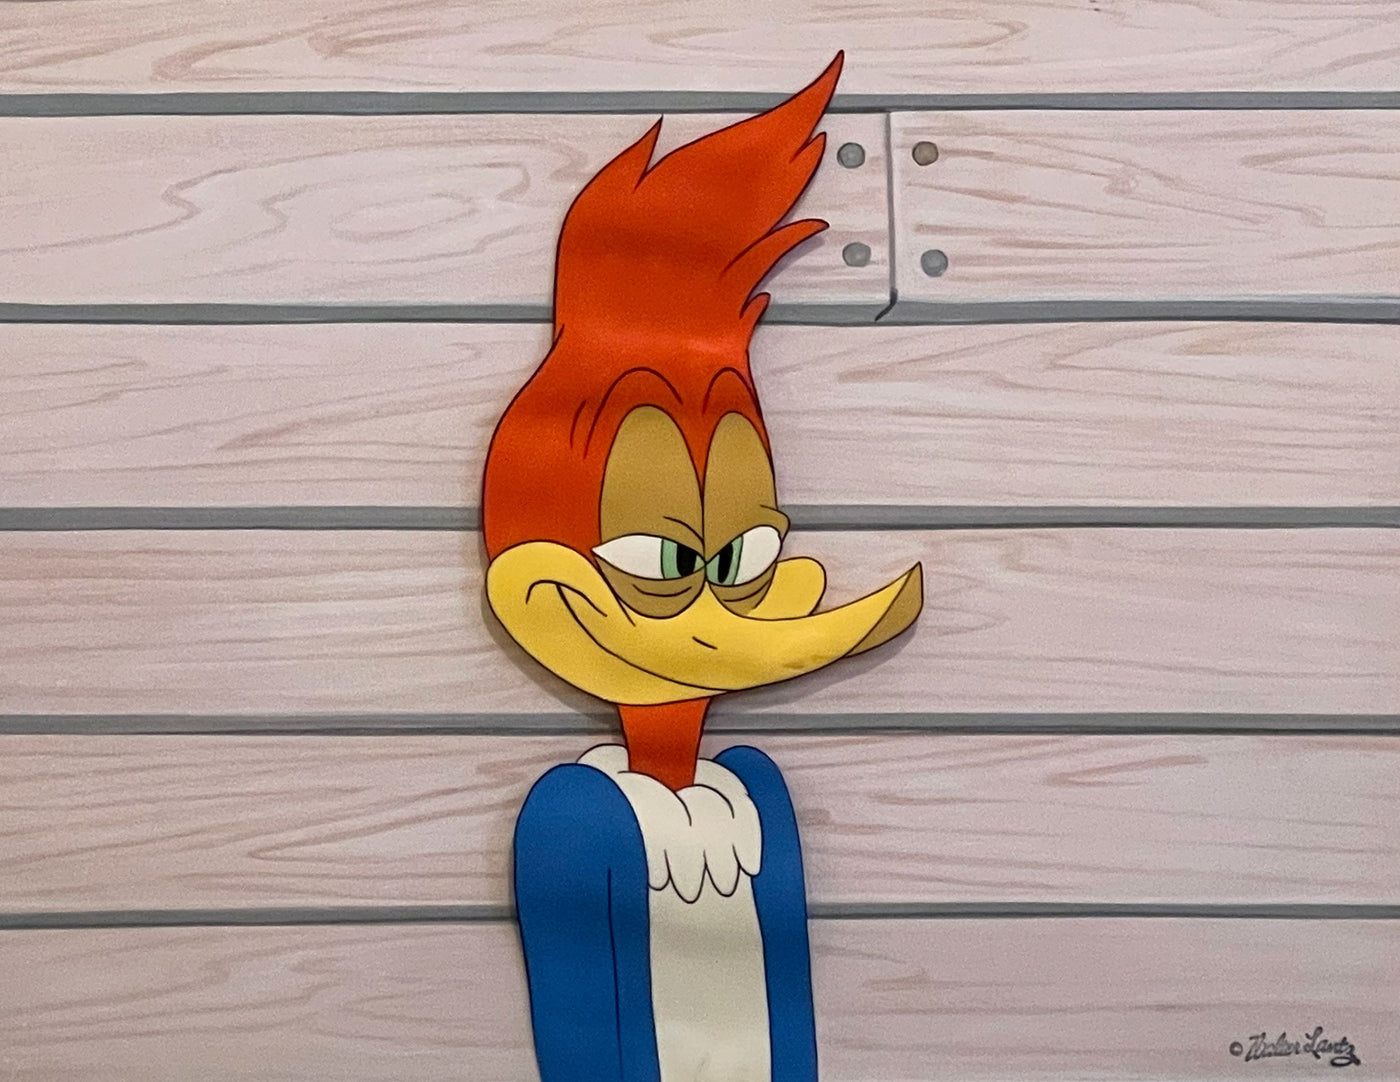 Original Walter Lantz Production Cel on Production Background featuring Woody Woodpecker